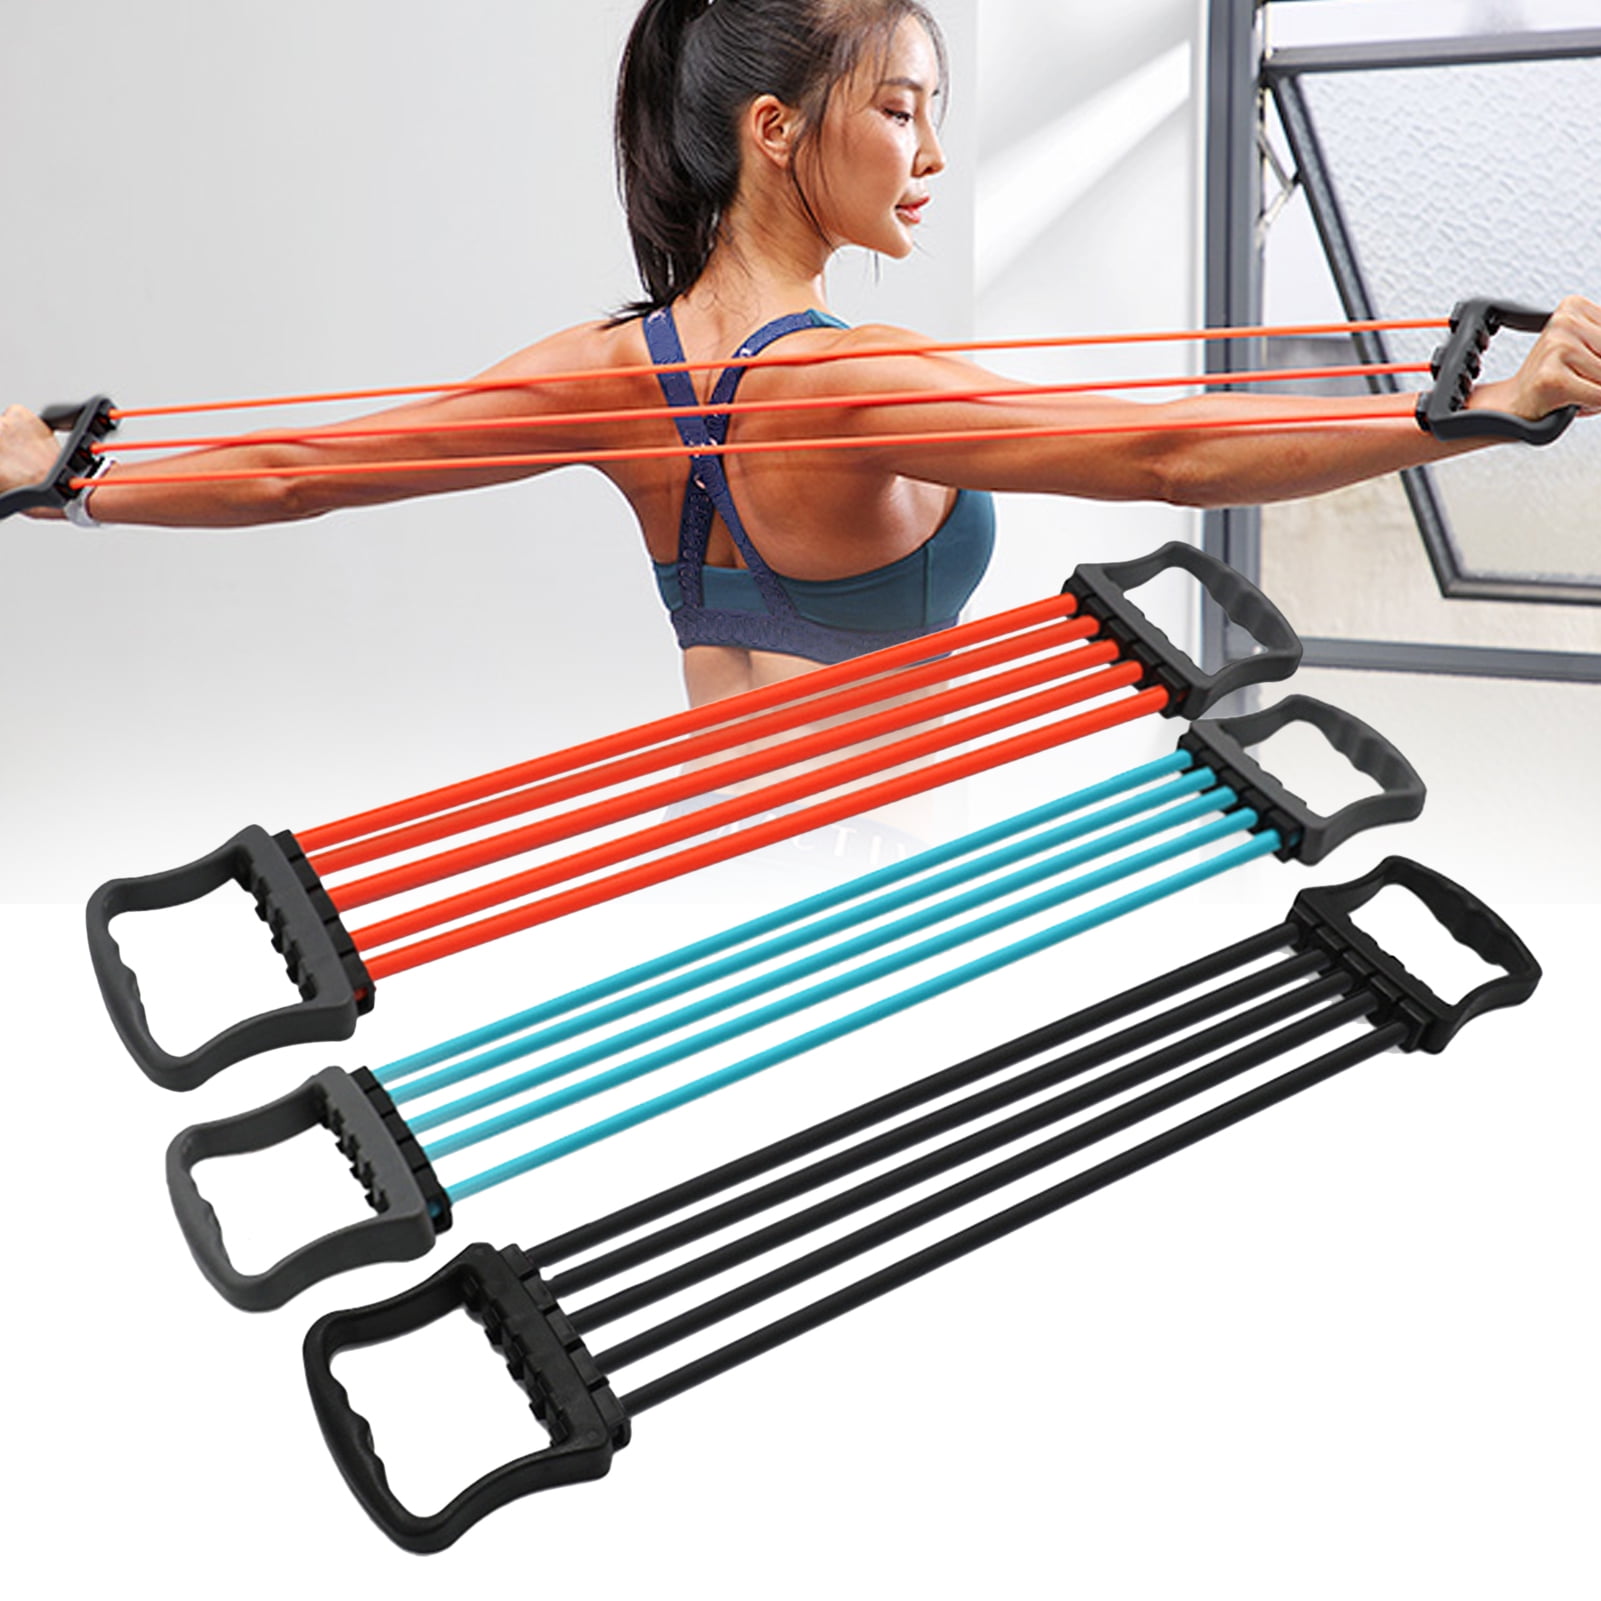 New Muscle Stretcher Spring Chest Expander Exercise Training Home Gym Pull Up 1X 